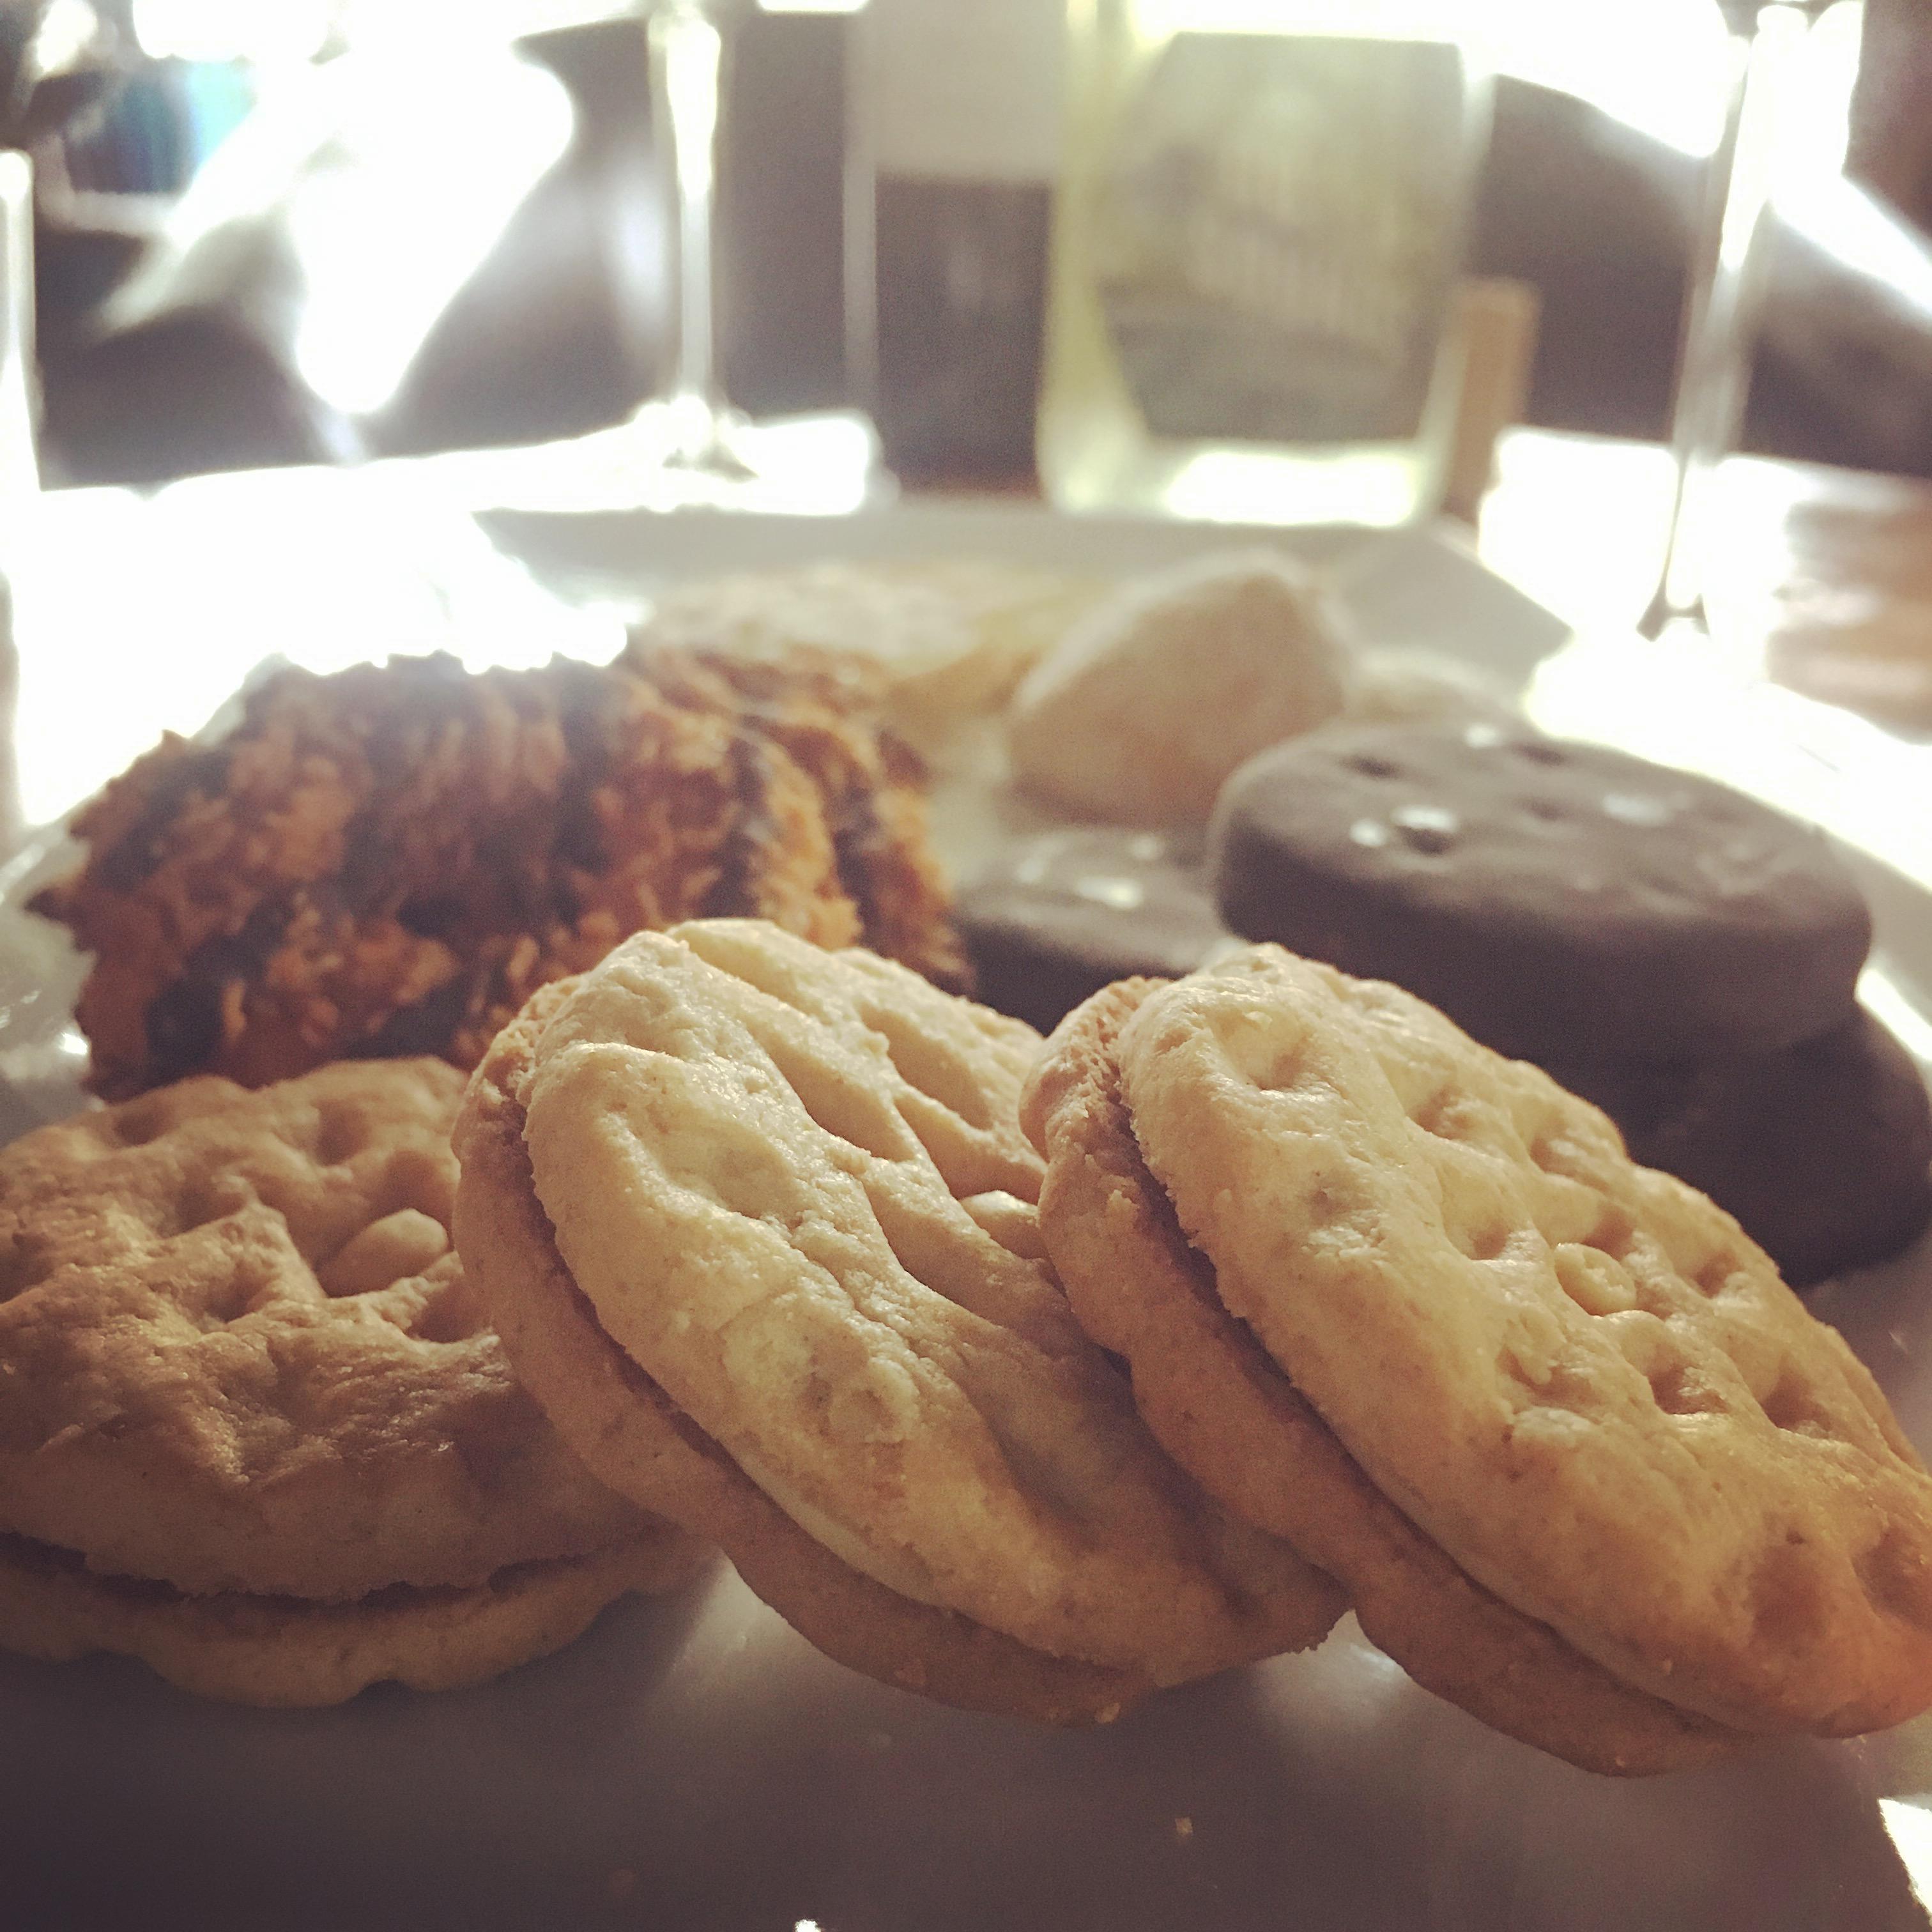 Wine + Girl Scout Cookie Pairing